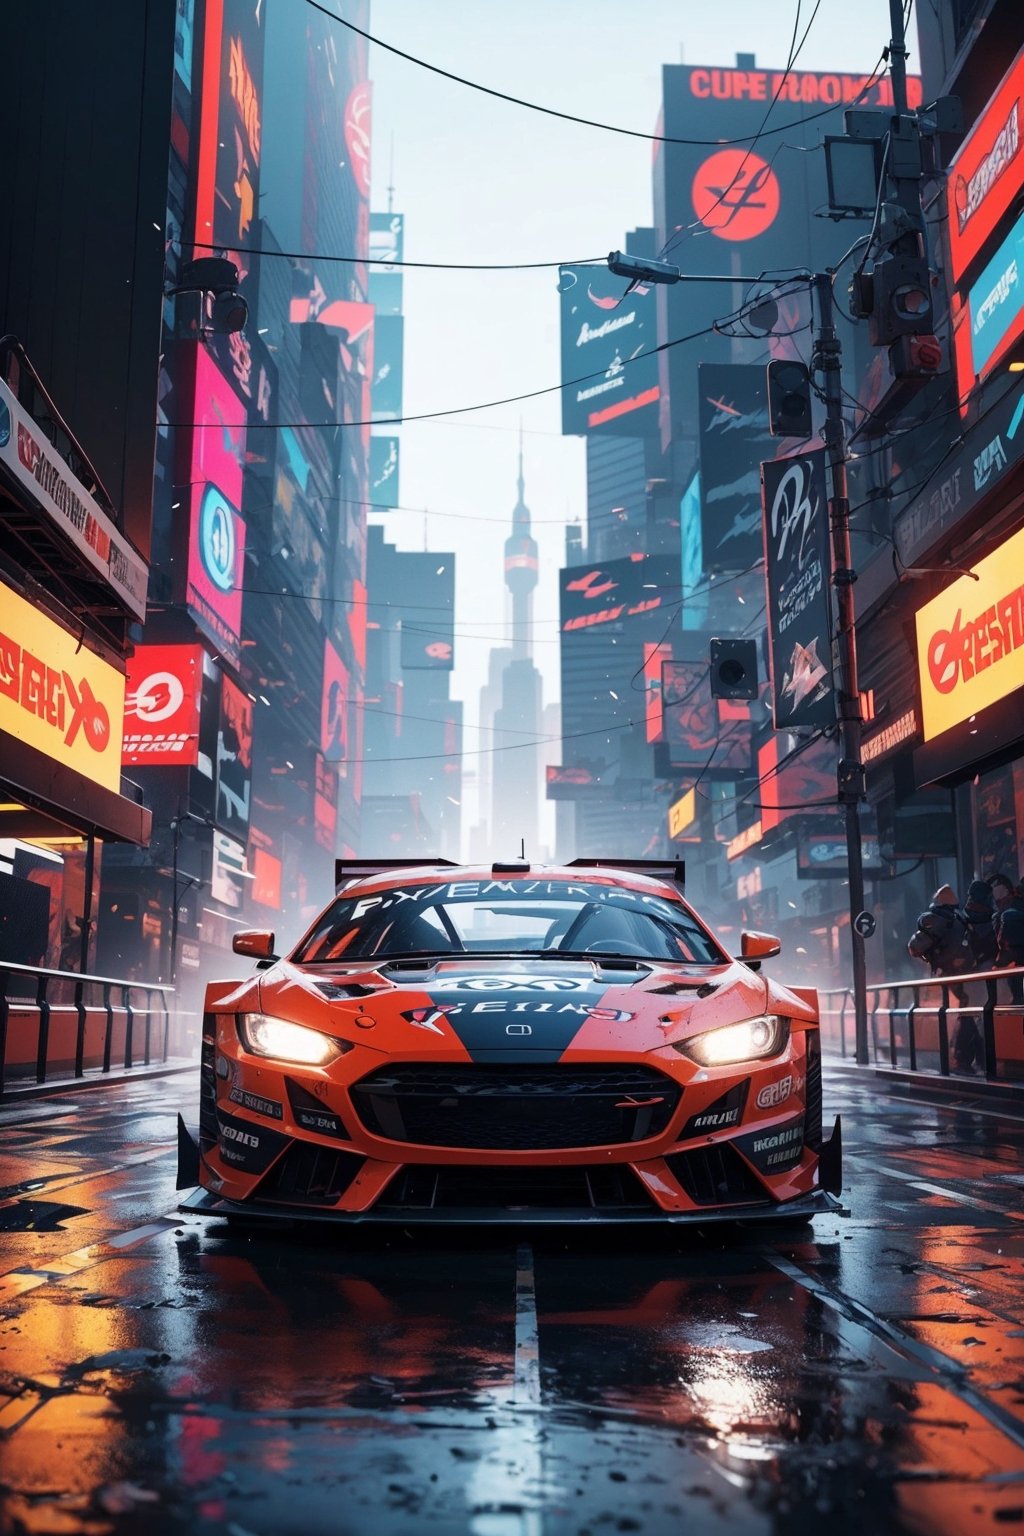 Digital art, cyberpunk car racing with the speed of light, a trail of intense light follows the speeding cycle, image evokes the sensation of speed, frozen movement, insane intricate detail, award winning art, raytracing, 8k, hdr, masterpiece, highly detailed, vibrant colors, minimalist, glitch aesthetic, supersymmetry